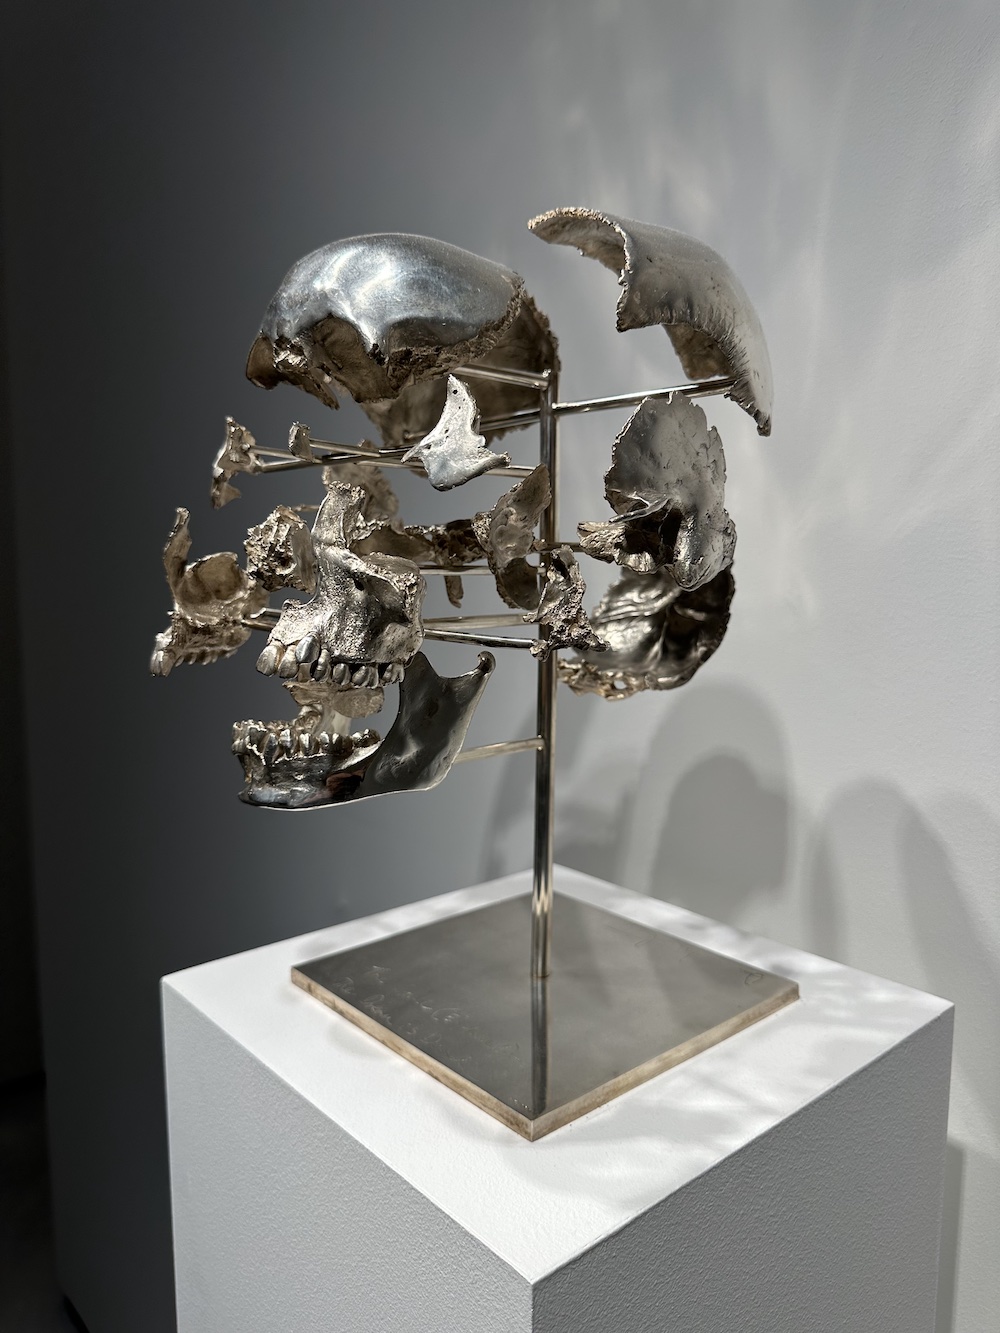 Damien Hirst - Skull Exploded – The Dream is Dead - sterling silver sculpture - 2007 - 38 x 24 x 29 cm - edition 1/12s